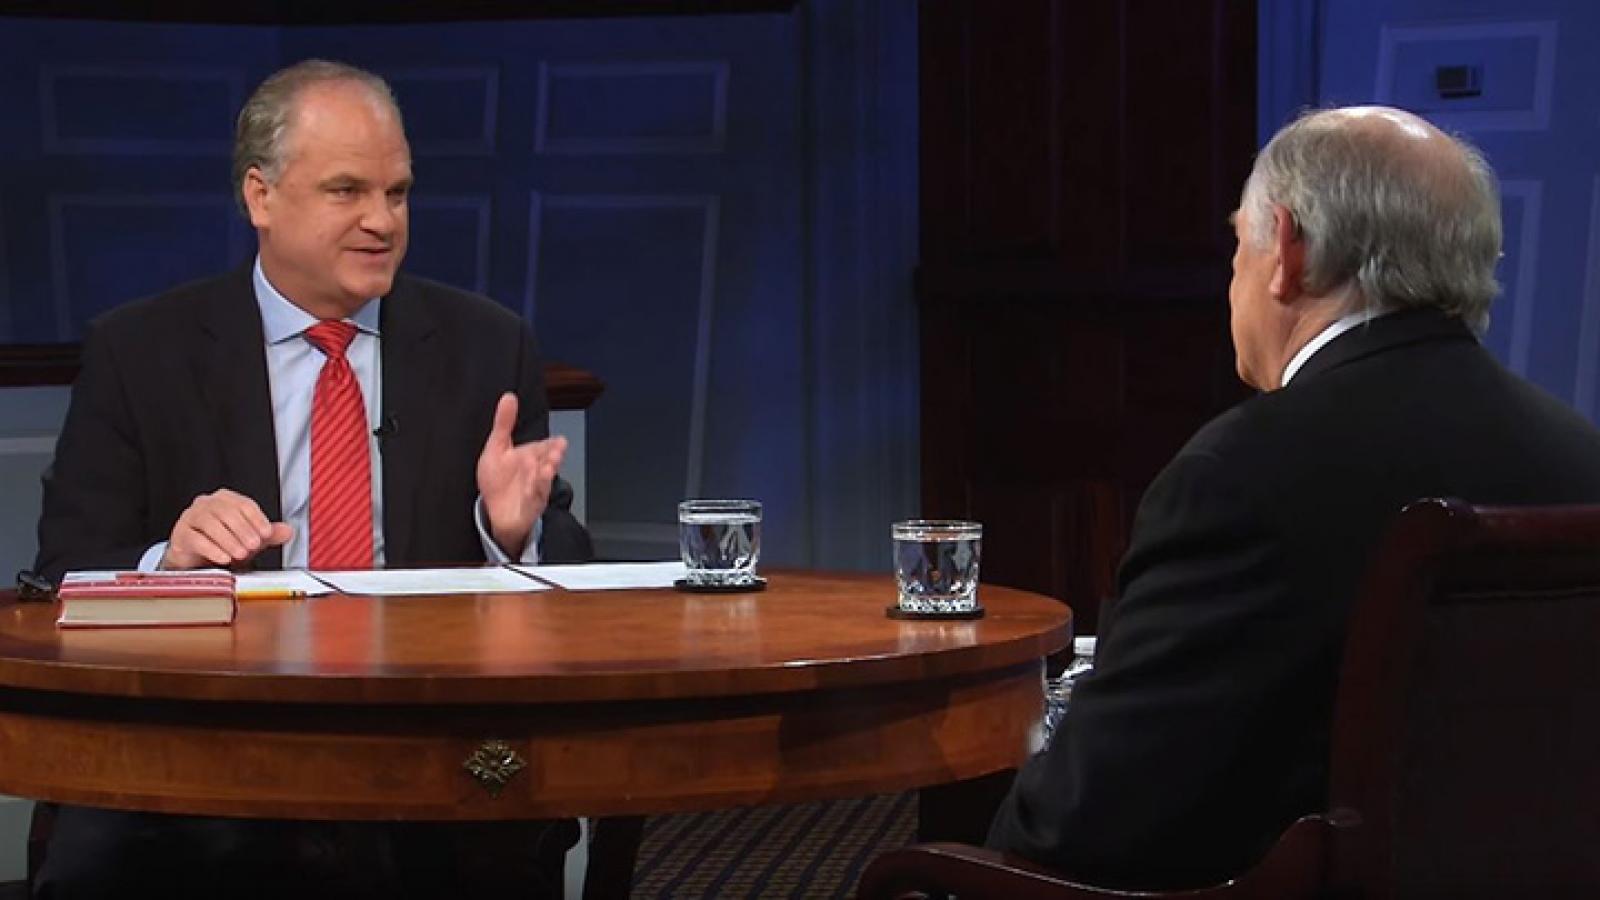 Charles Murray says Americans should simply, and non-violently, refuse to obey stupid laws